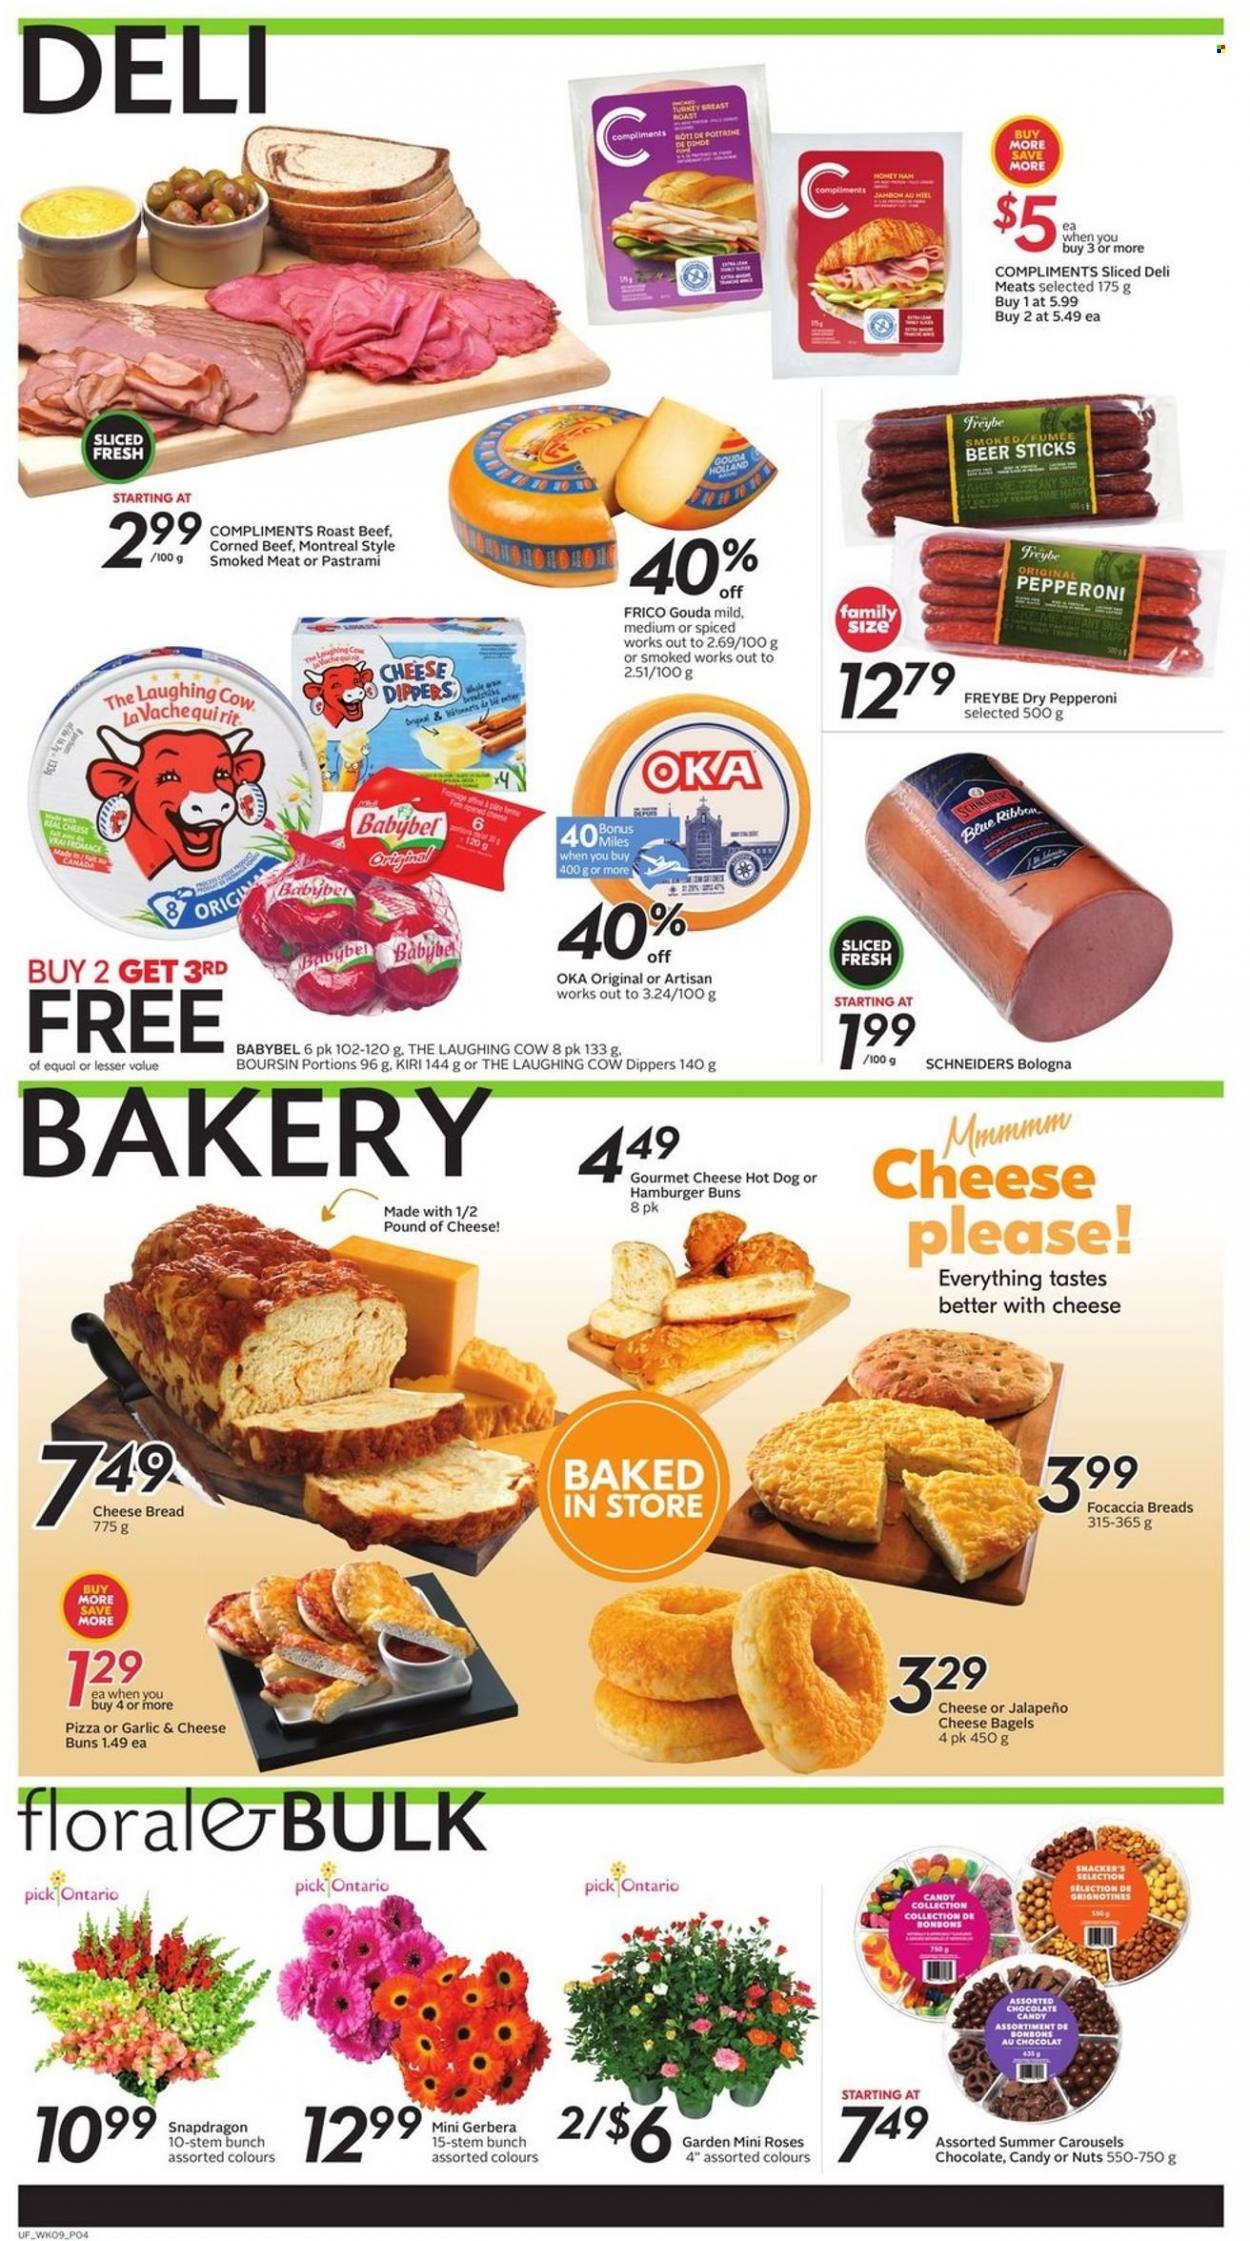 thumbnail - Sobeys Urban Fresh Flyer - June 30, 2022 - July 06, 2022 - Sales products - bagels, bread, Blue Ribbon, buns, burger buns, hot dog, pizza, turkey roast, pastrami, bologna sausage, pepperoni, corned beef, gouda, Kiri, The Laughing Cow, Babybel, snack, chocolate candies, honey, beer, beef meat, roast beef. Page 4.